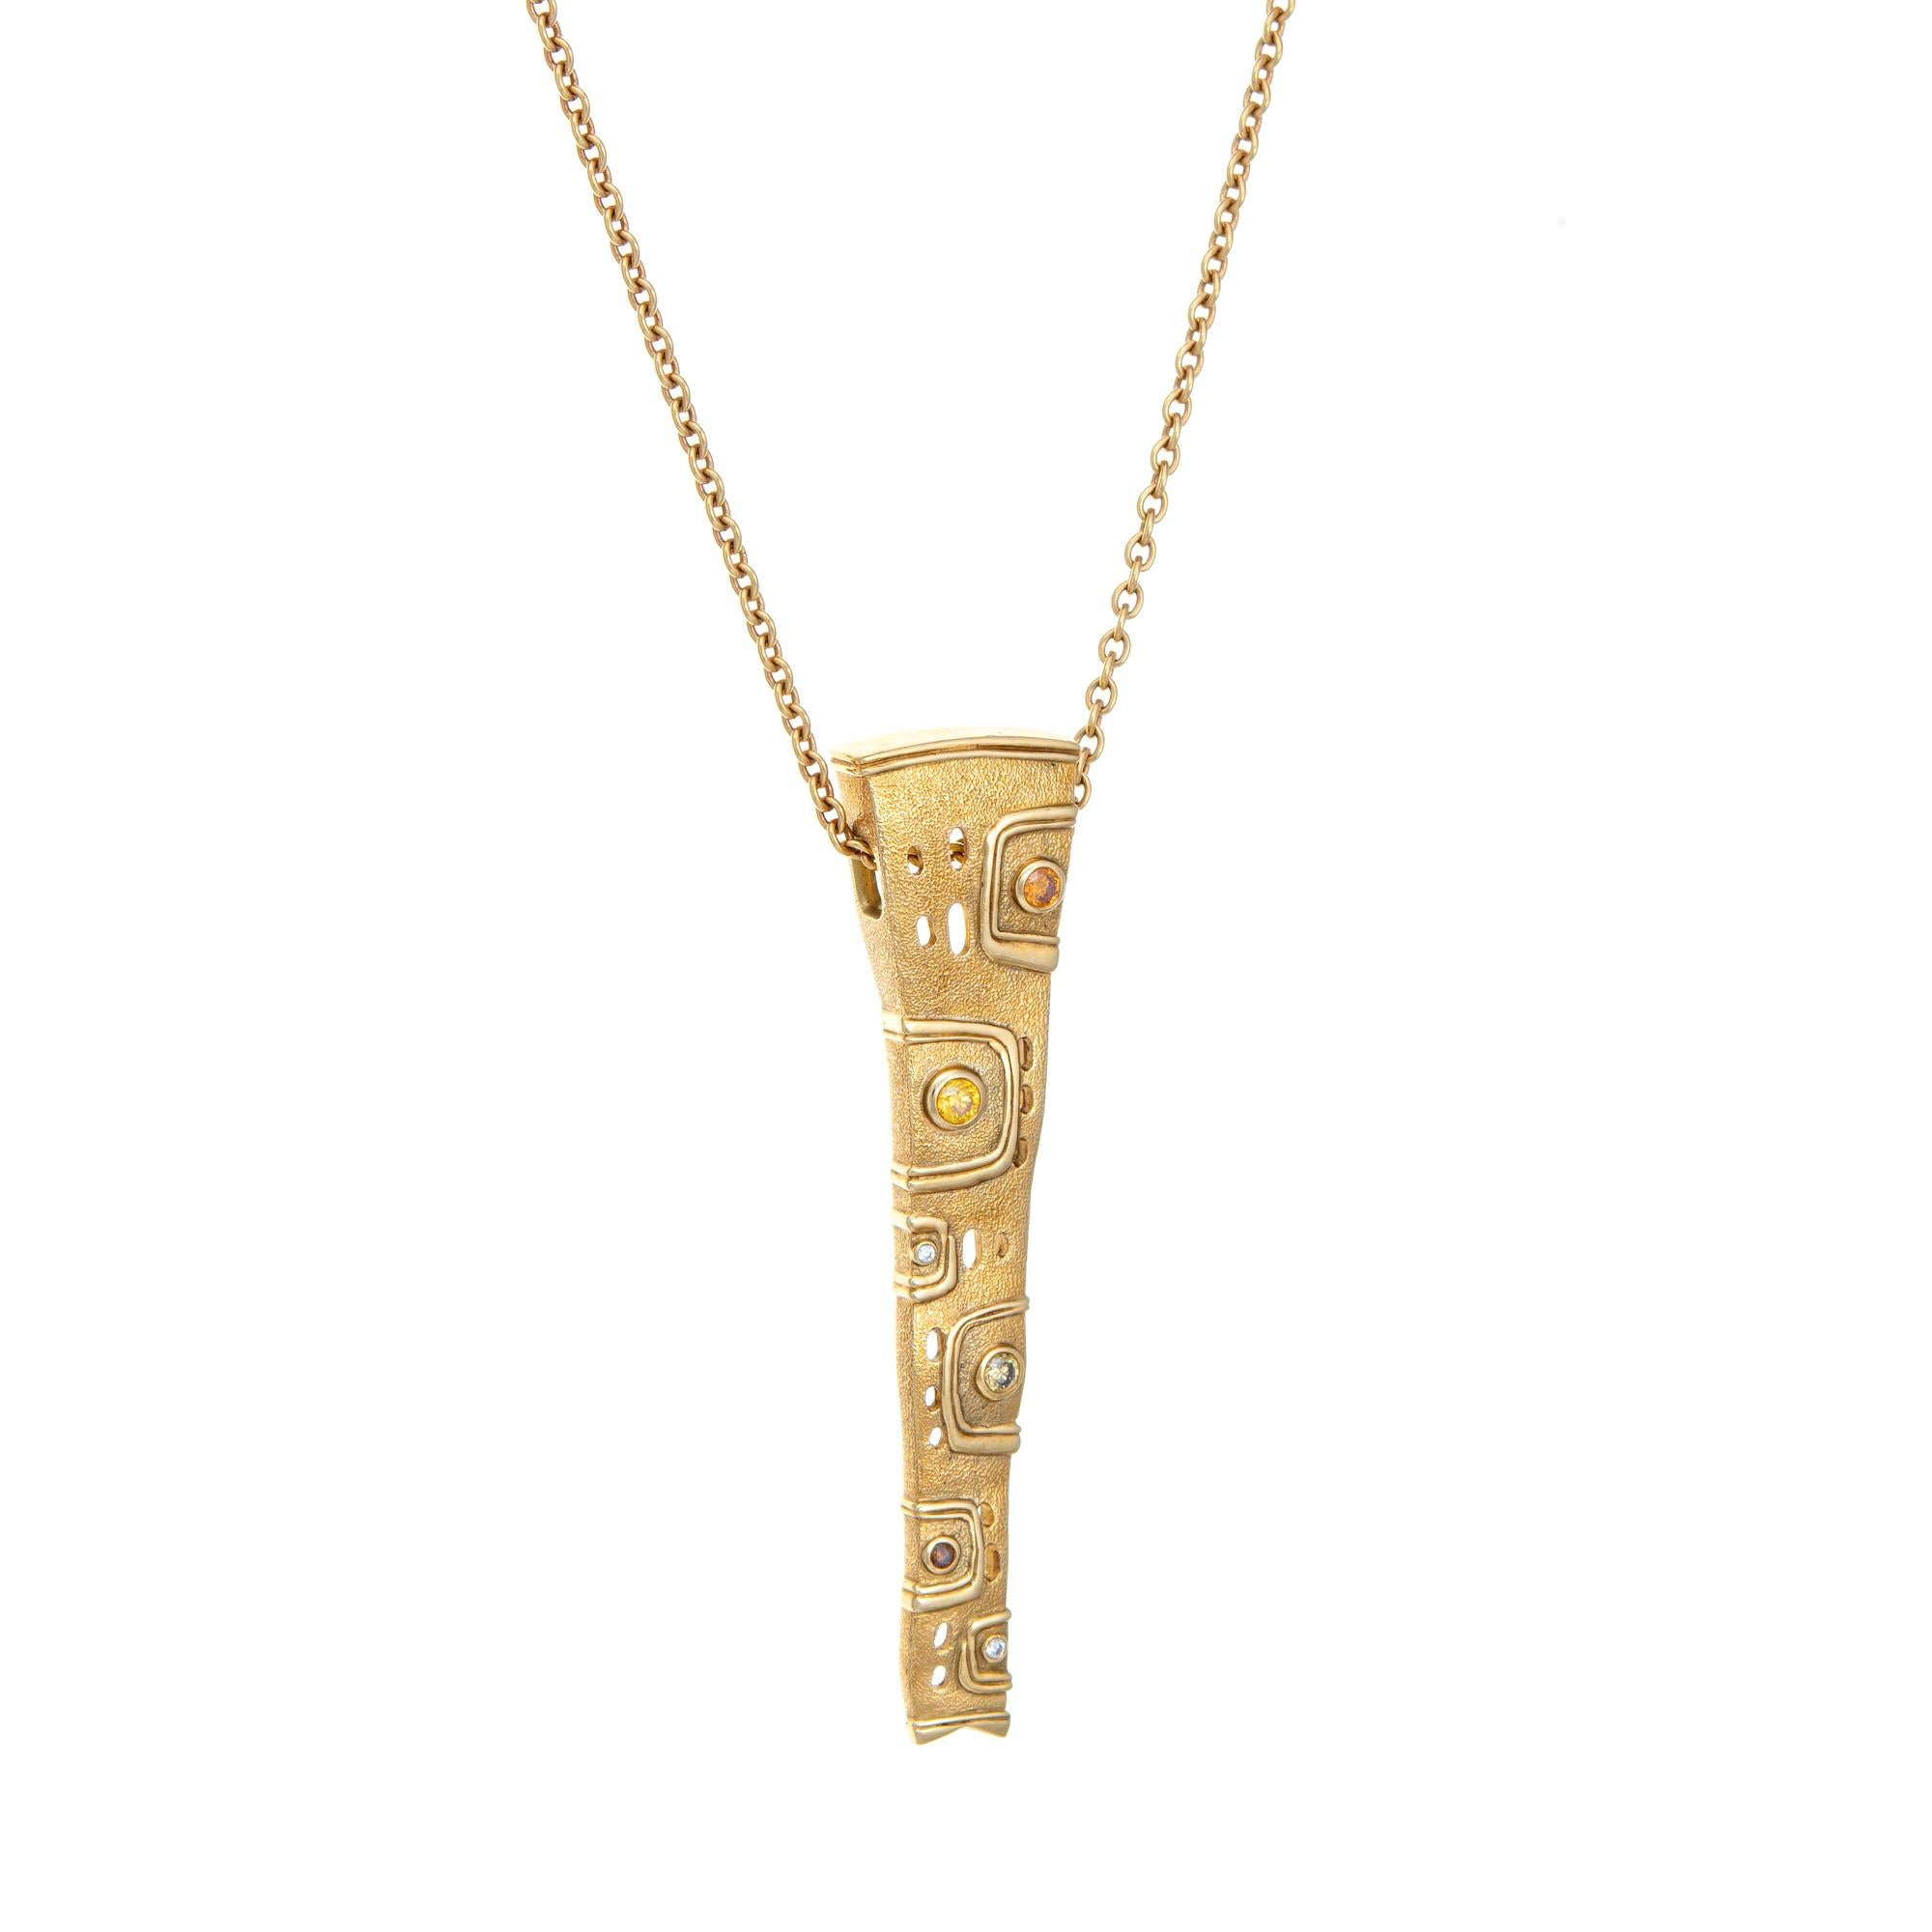 Finely detailed Alex Sepkus colored diamond pendant crafted in 18 karat yellow gold. 

4 colored diamonds and 2 small white diamonds are set into the pendant. The pendant comes with a 17 1/2 inch necklace (signed Schoeffel) and is great worn alone